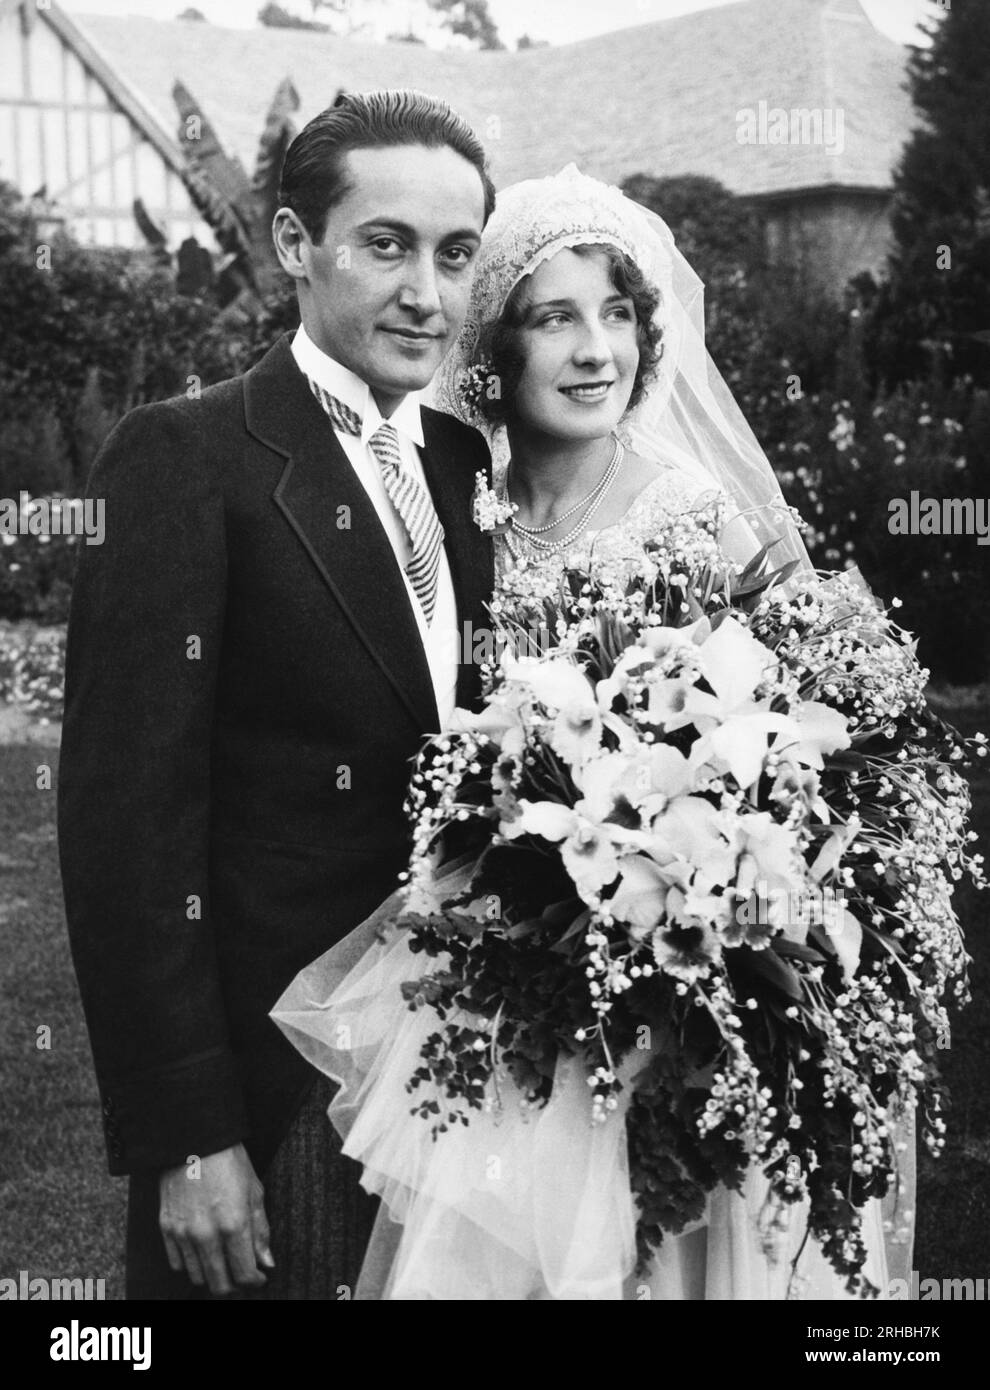 Hollywood, California:  October 3, 1927 Movie producer Irving Thalberg and actress Norma Shearer on their wedding day. Stock Photo